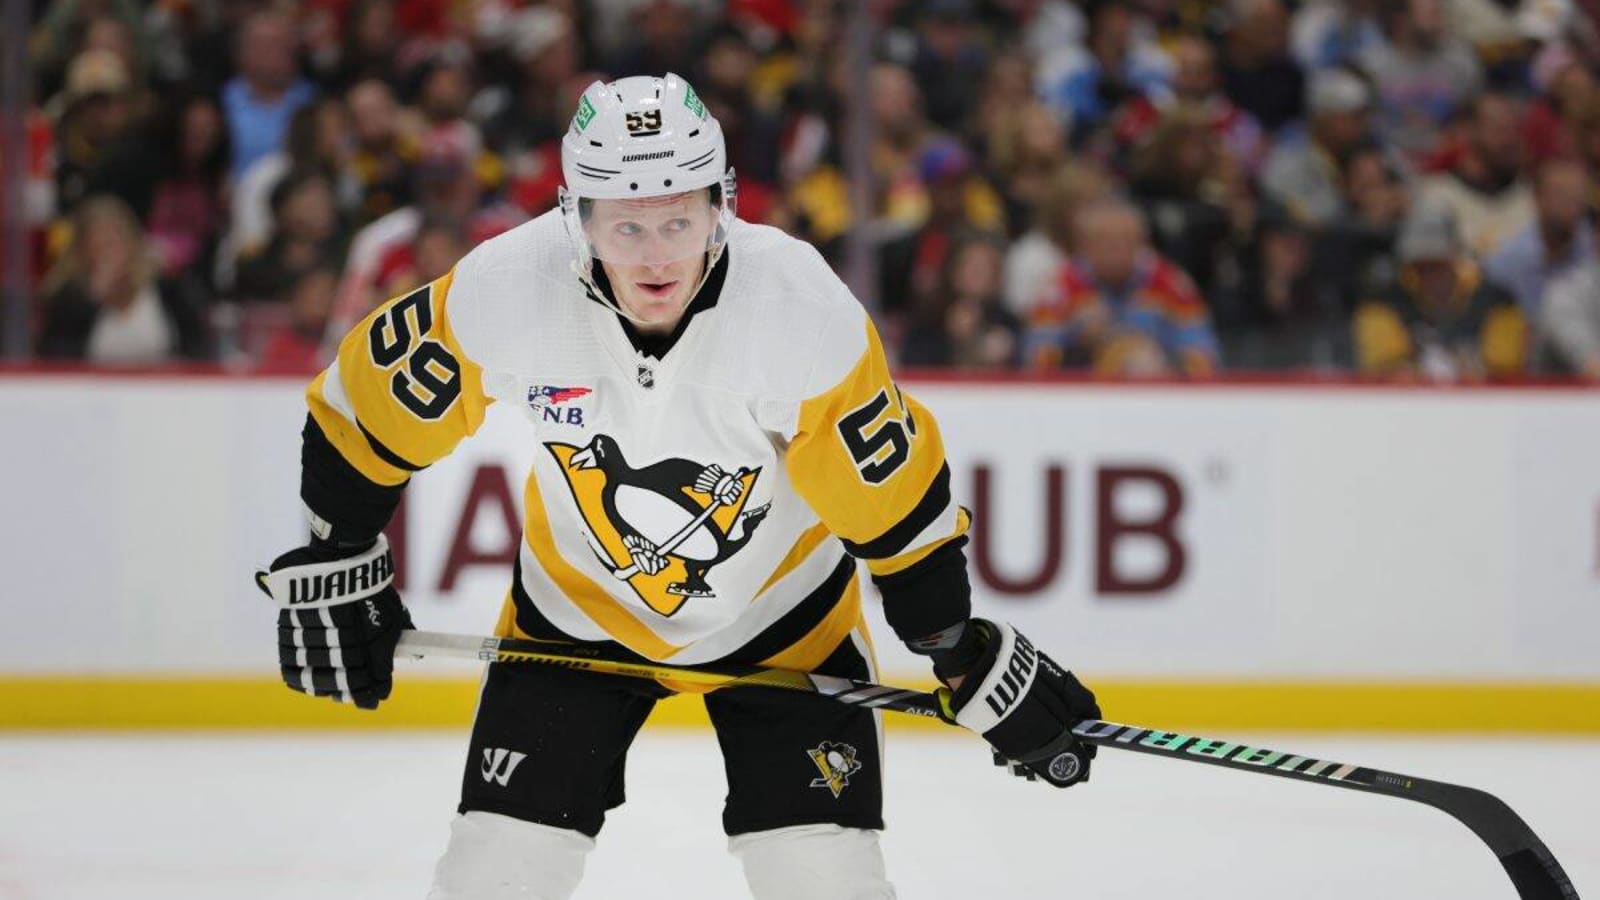 Sources: Carolina Hurricanes in the process of acquiring Jake Guentzel from Pittsburgh Penguins